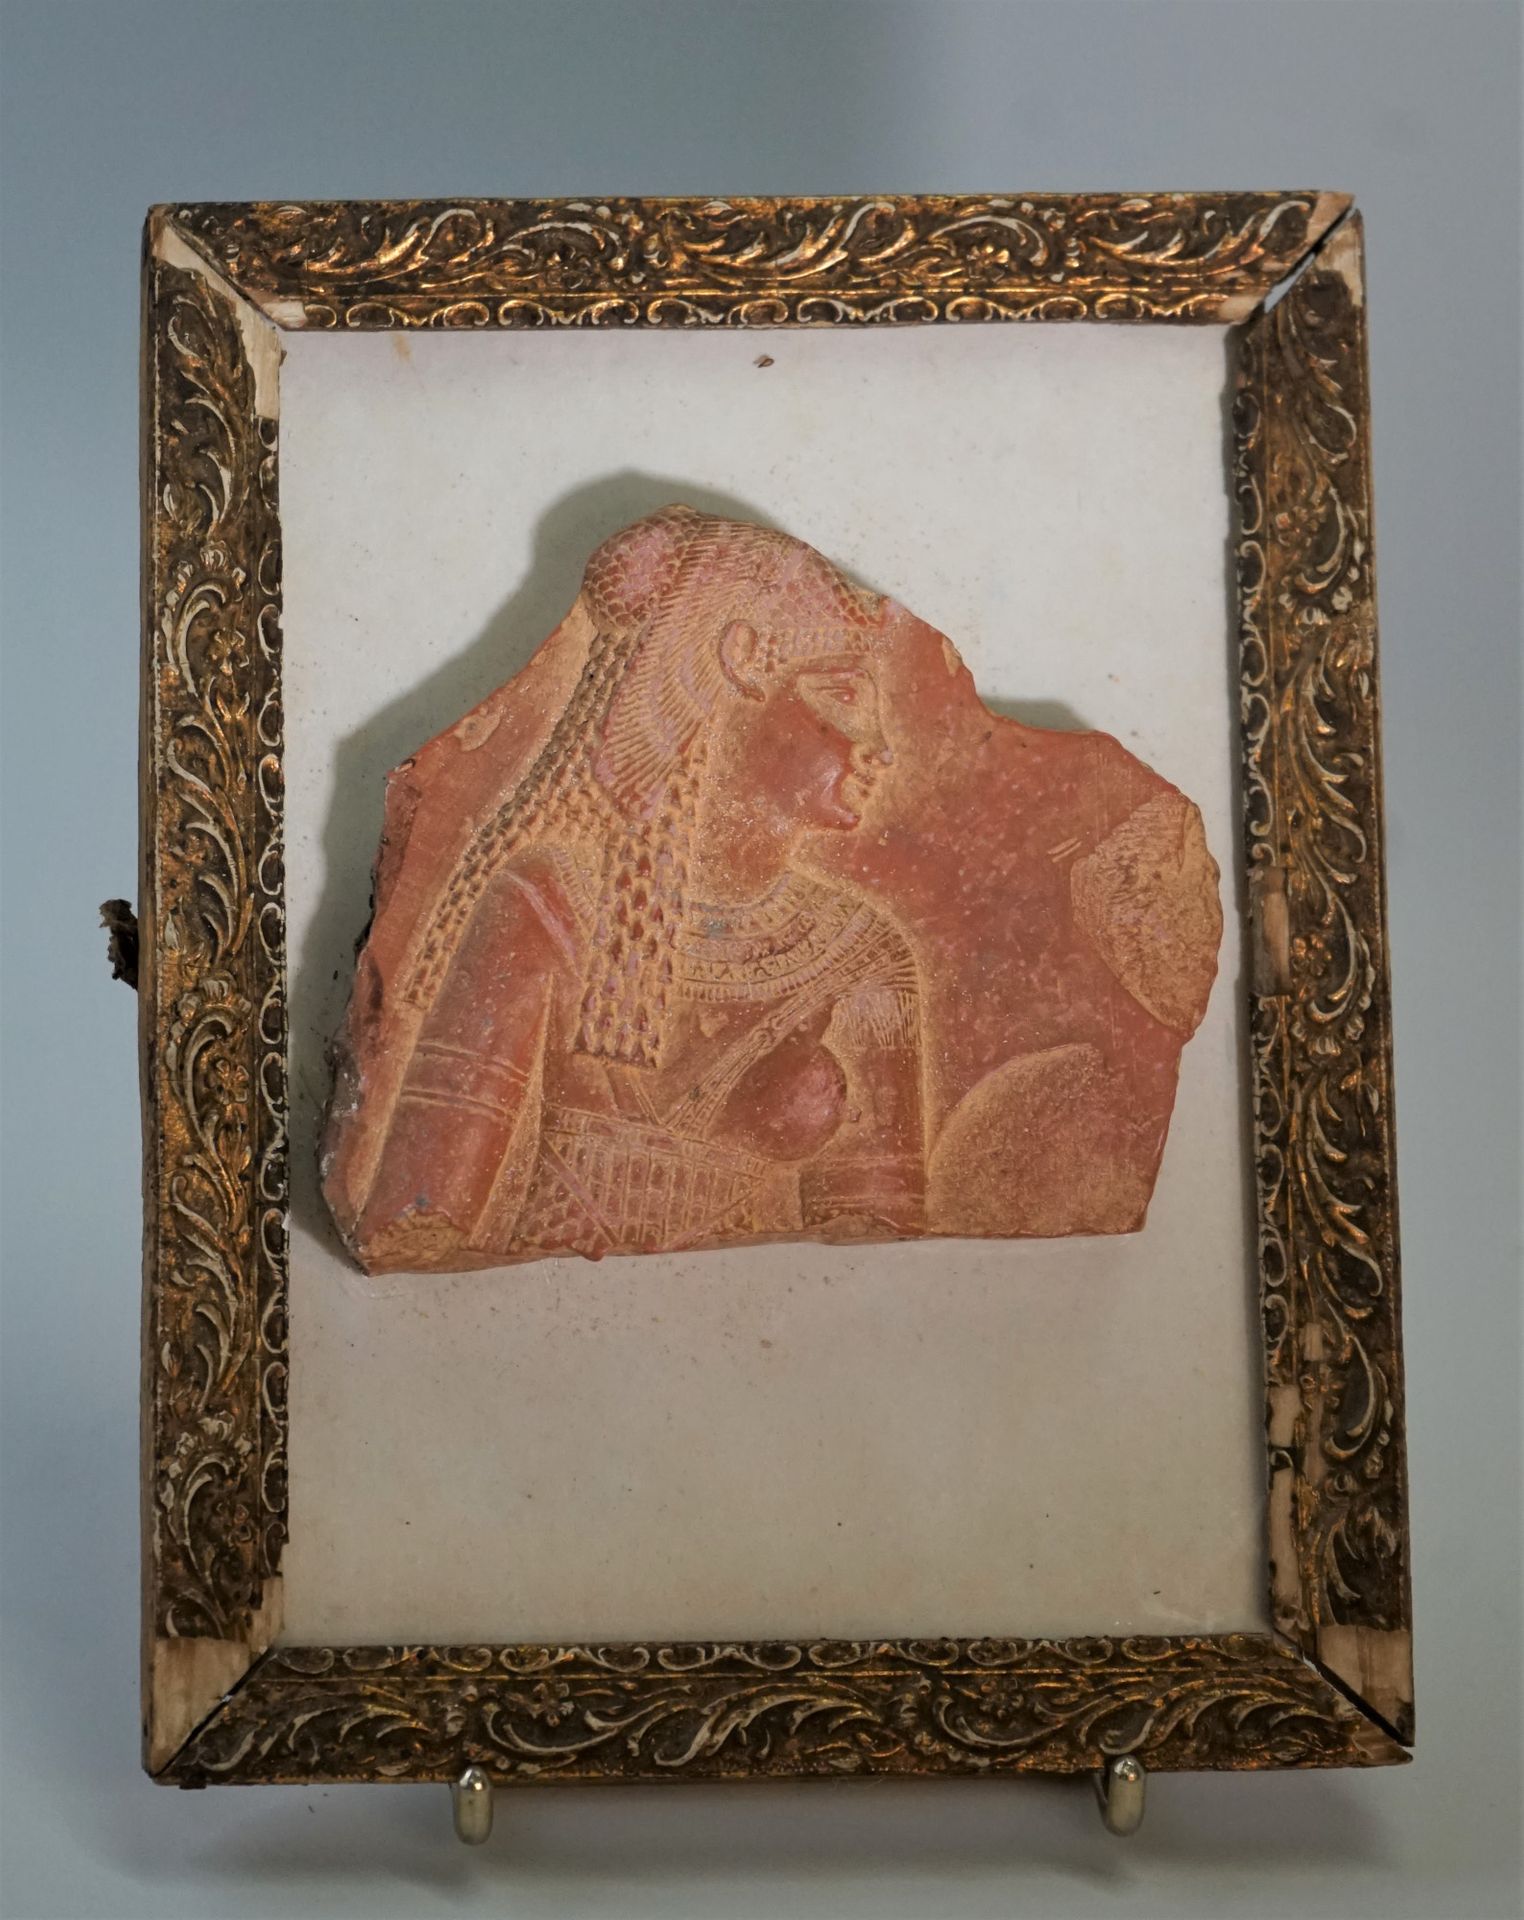 Null Fragment representing a Ptolemaic queen.

Ancient Egyptian work

9x10.7cm